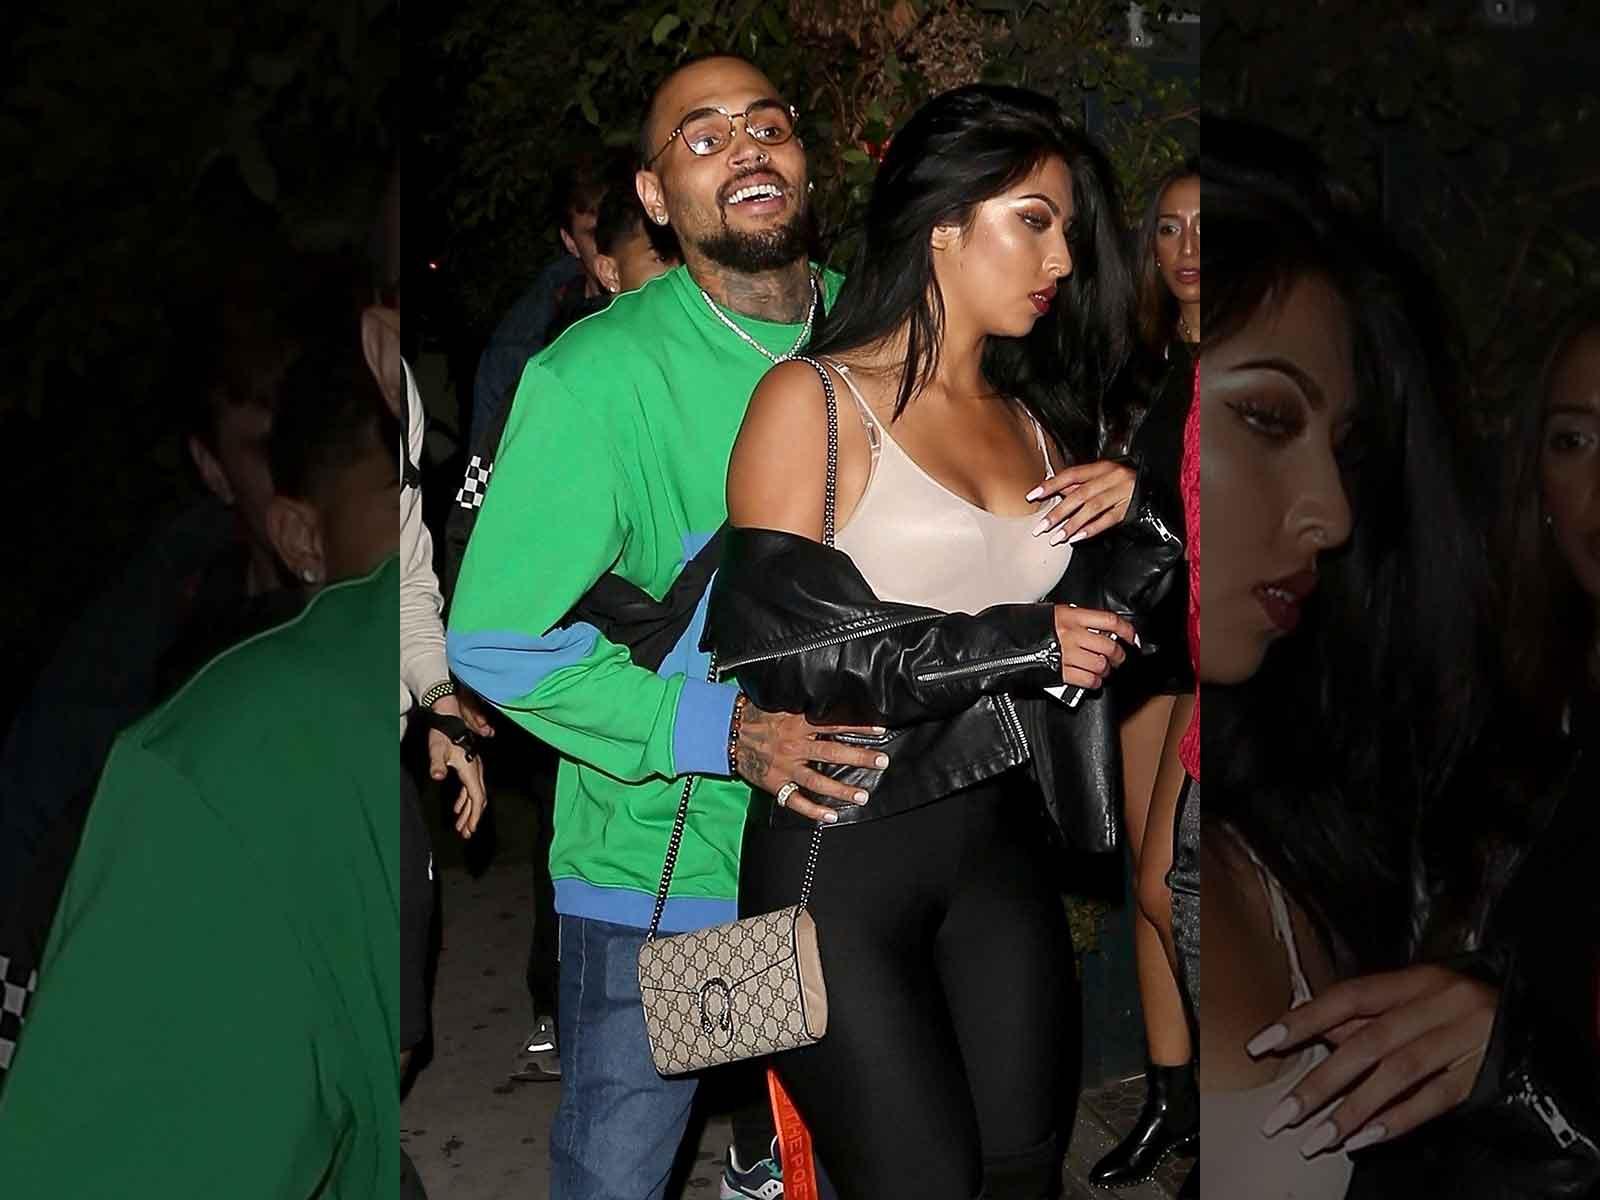 Chris Brown Gets It Poppin’ With New Mystery Girl